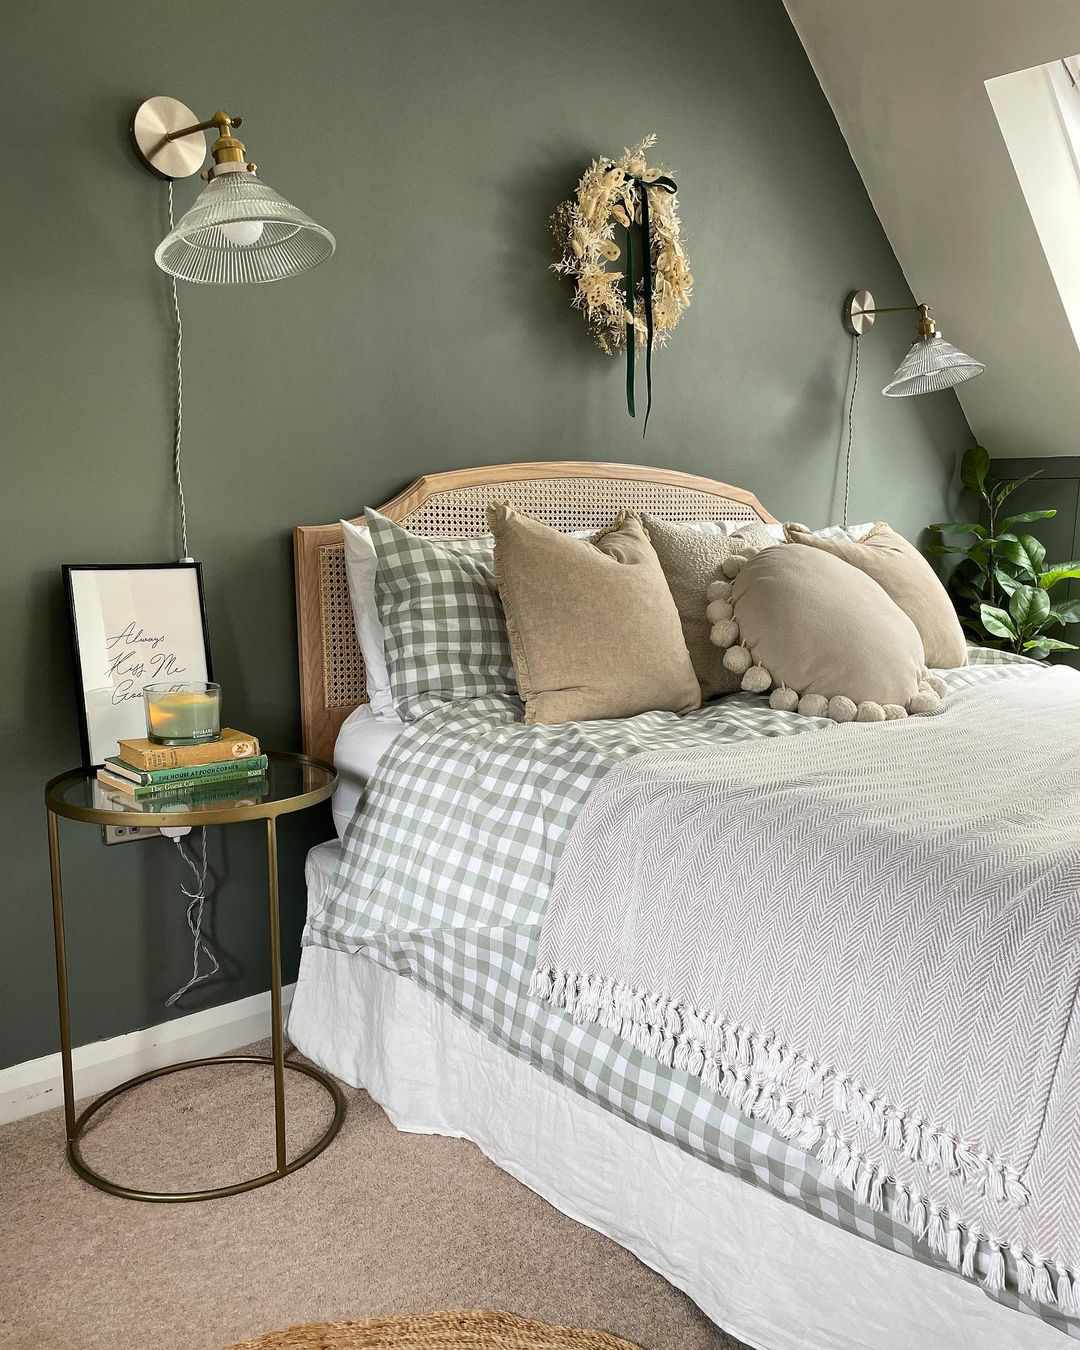 green accent wall and low ceilings